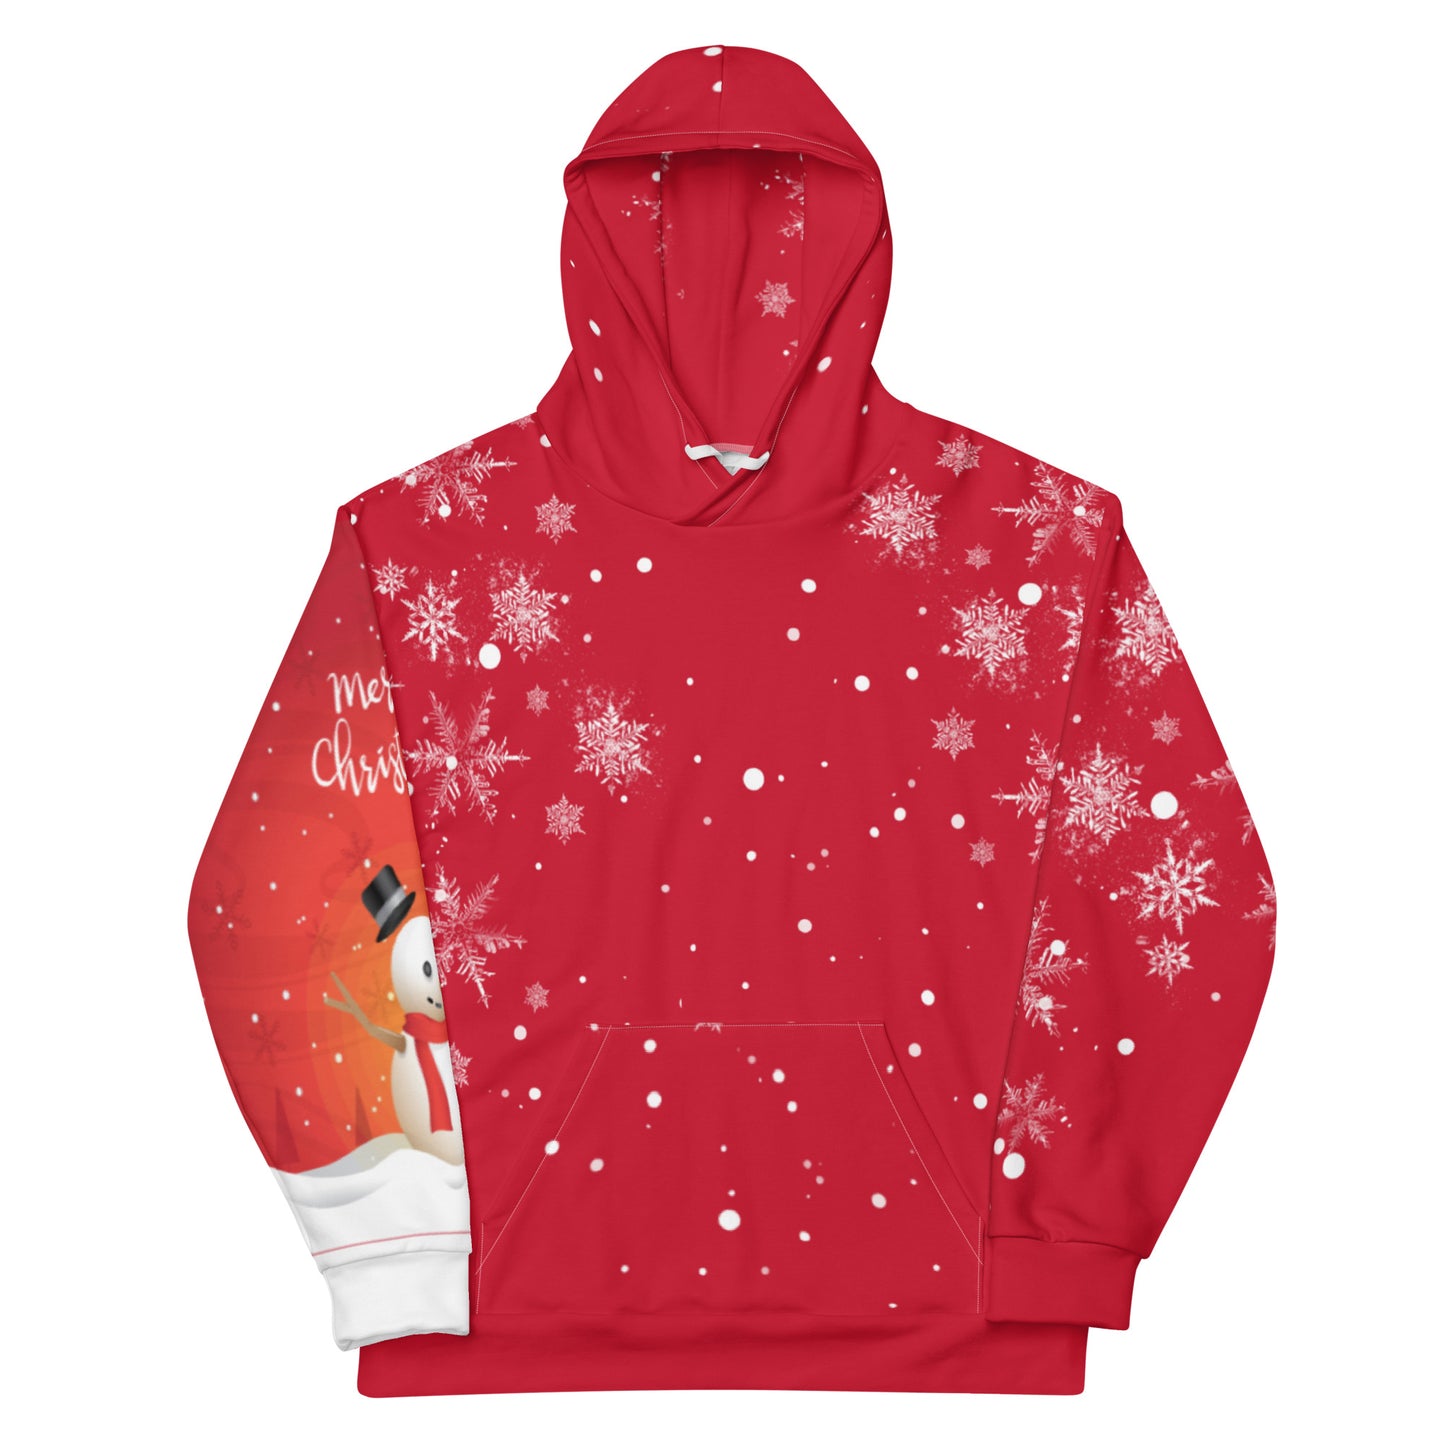 Christmas Hoodie with unique design for Men and Women